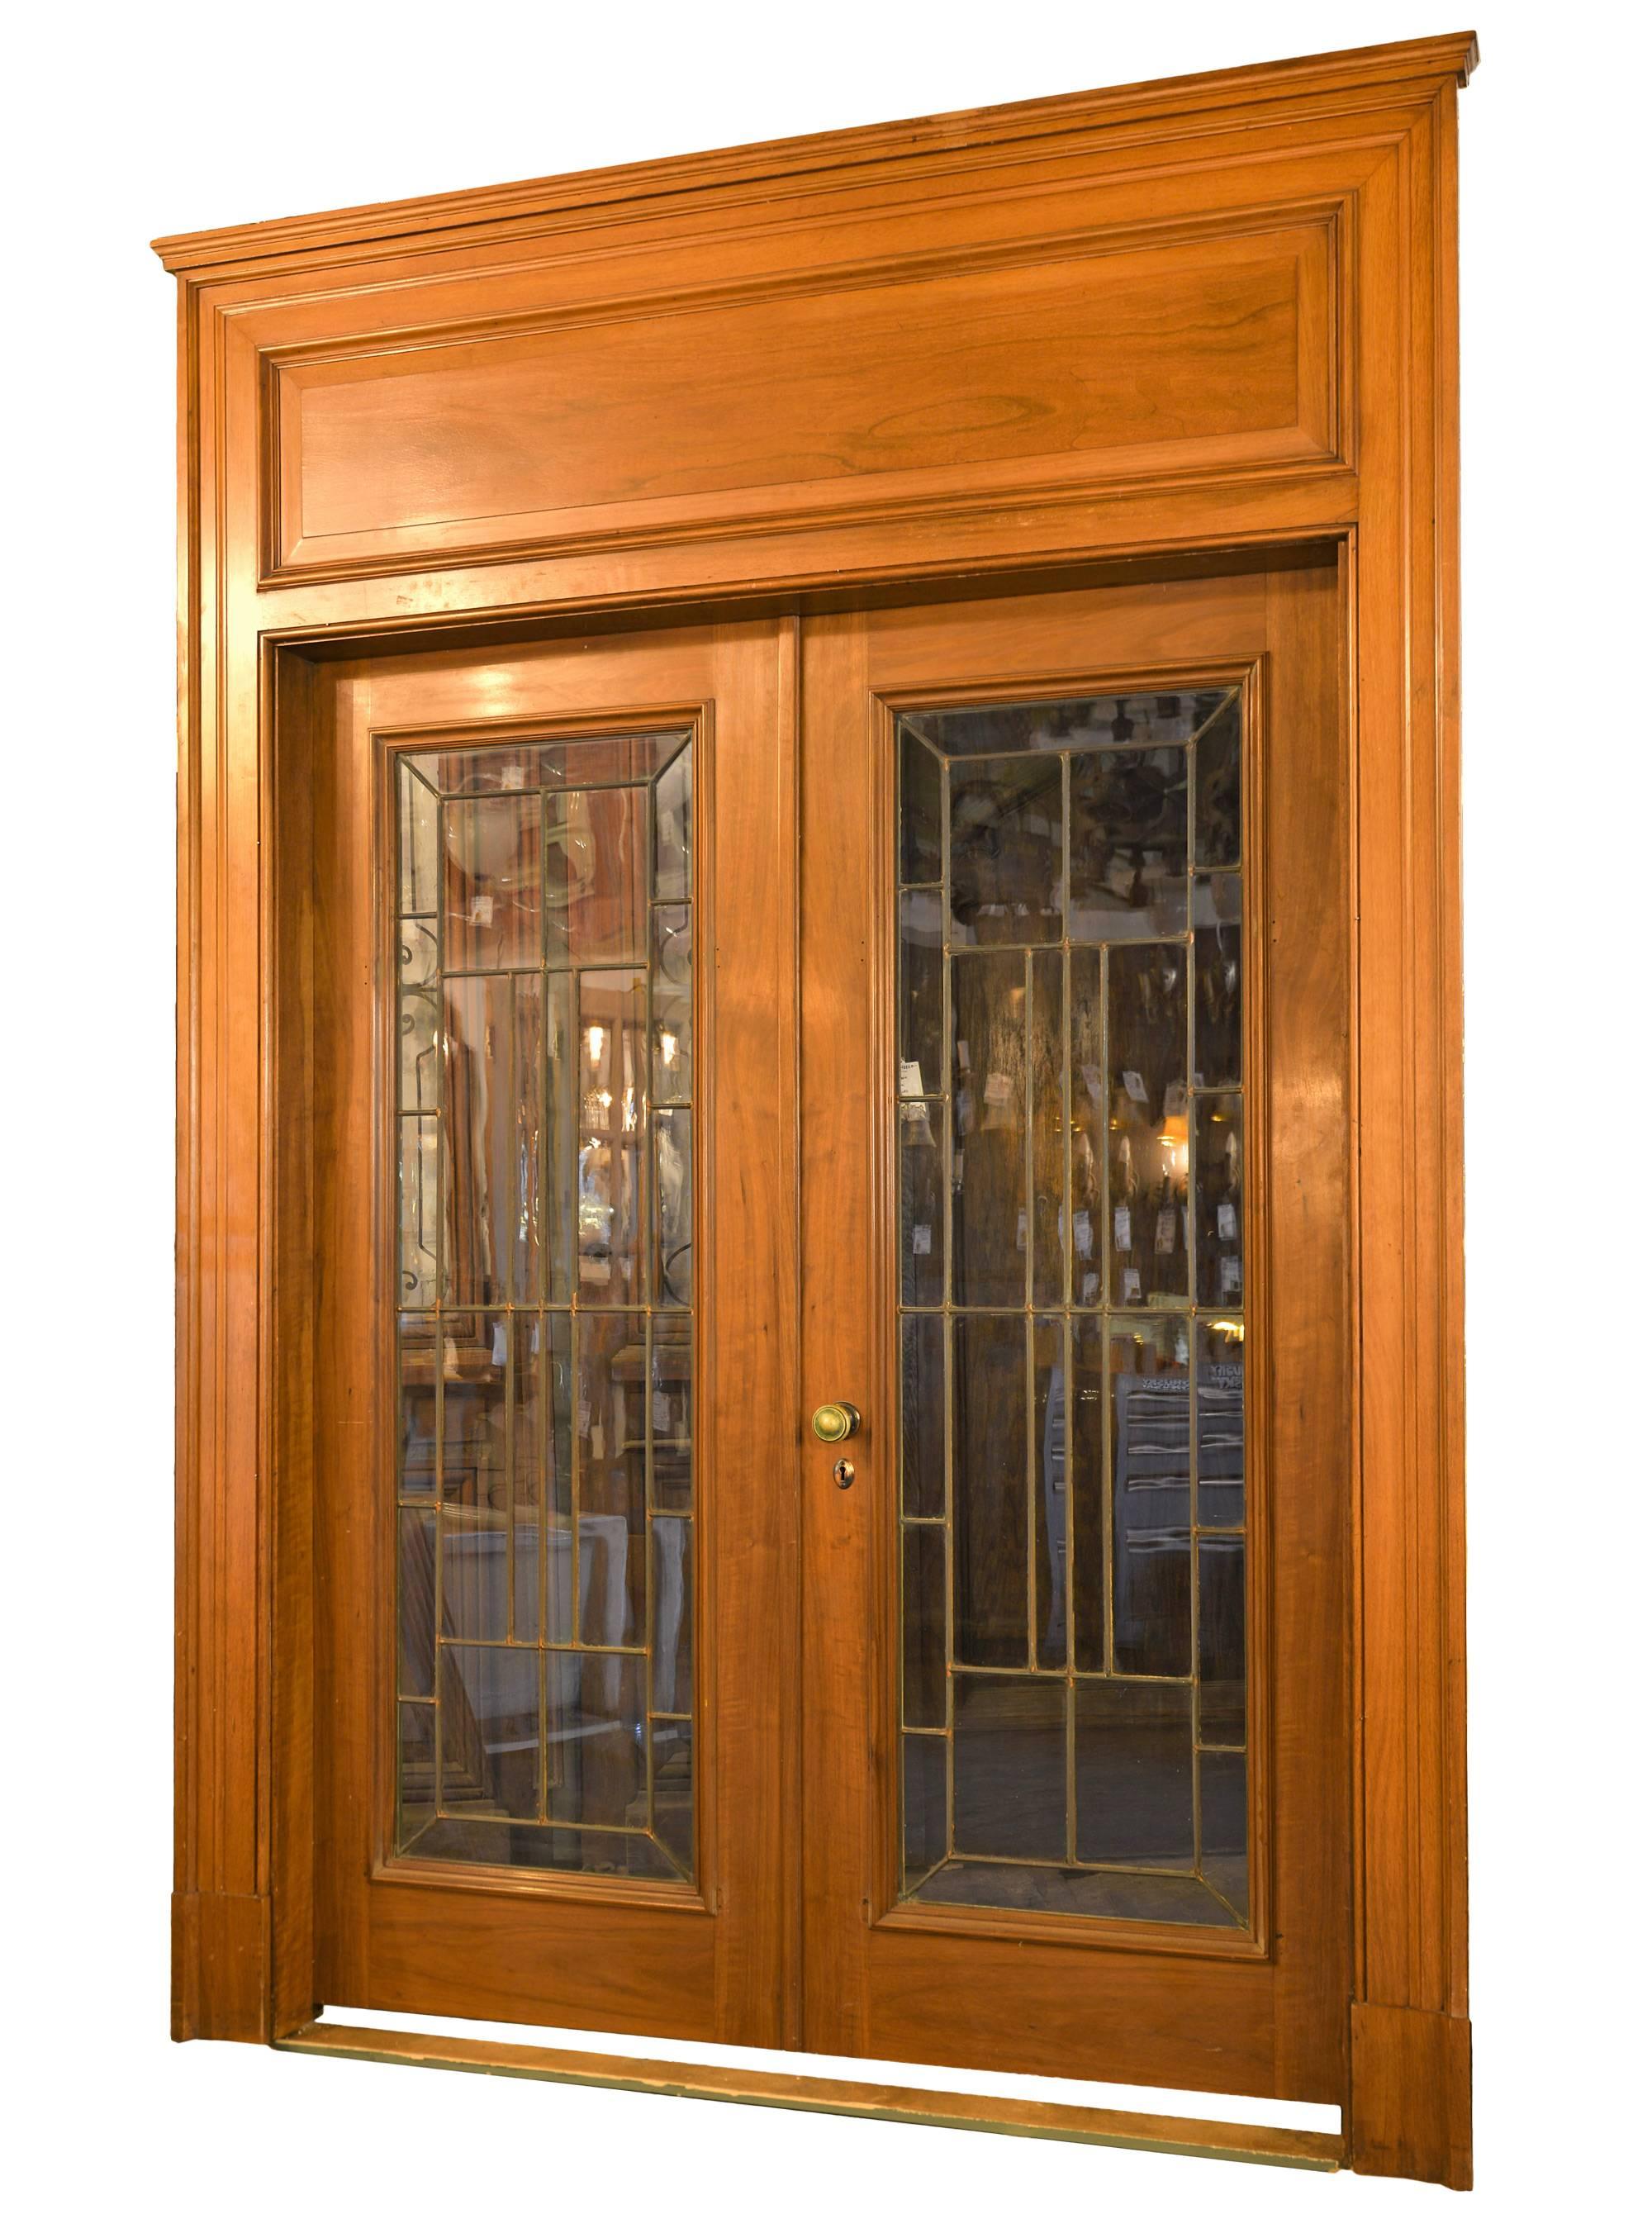 Meticulously removed from a 1915 home in Hinsdale, Illinois, this fantastic French door unit is made from beautiful walnut and leaded glass. These doors are complete with their original cast brass hardware and over-sized walnut panel trim and jamb.